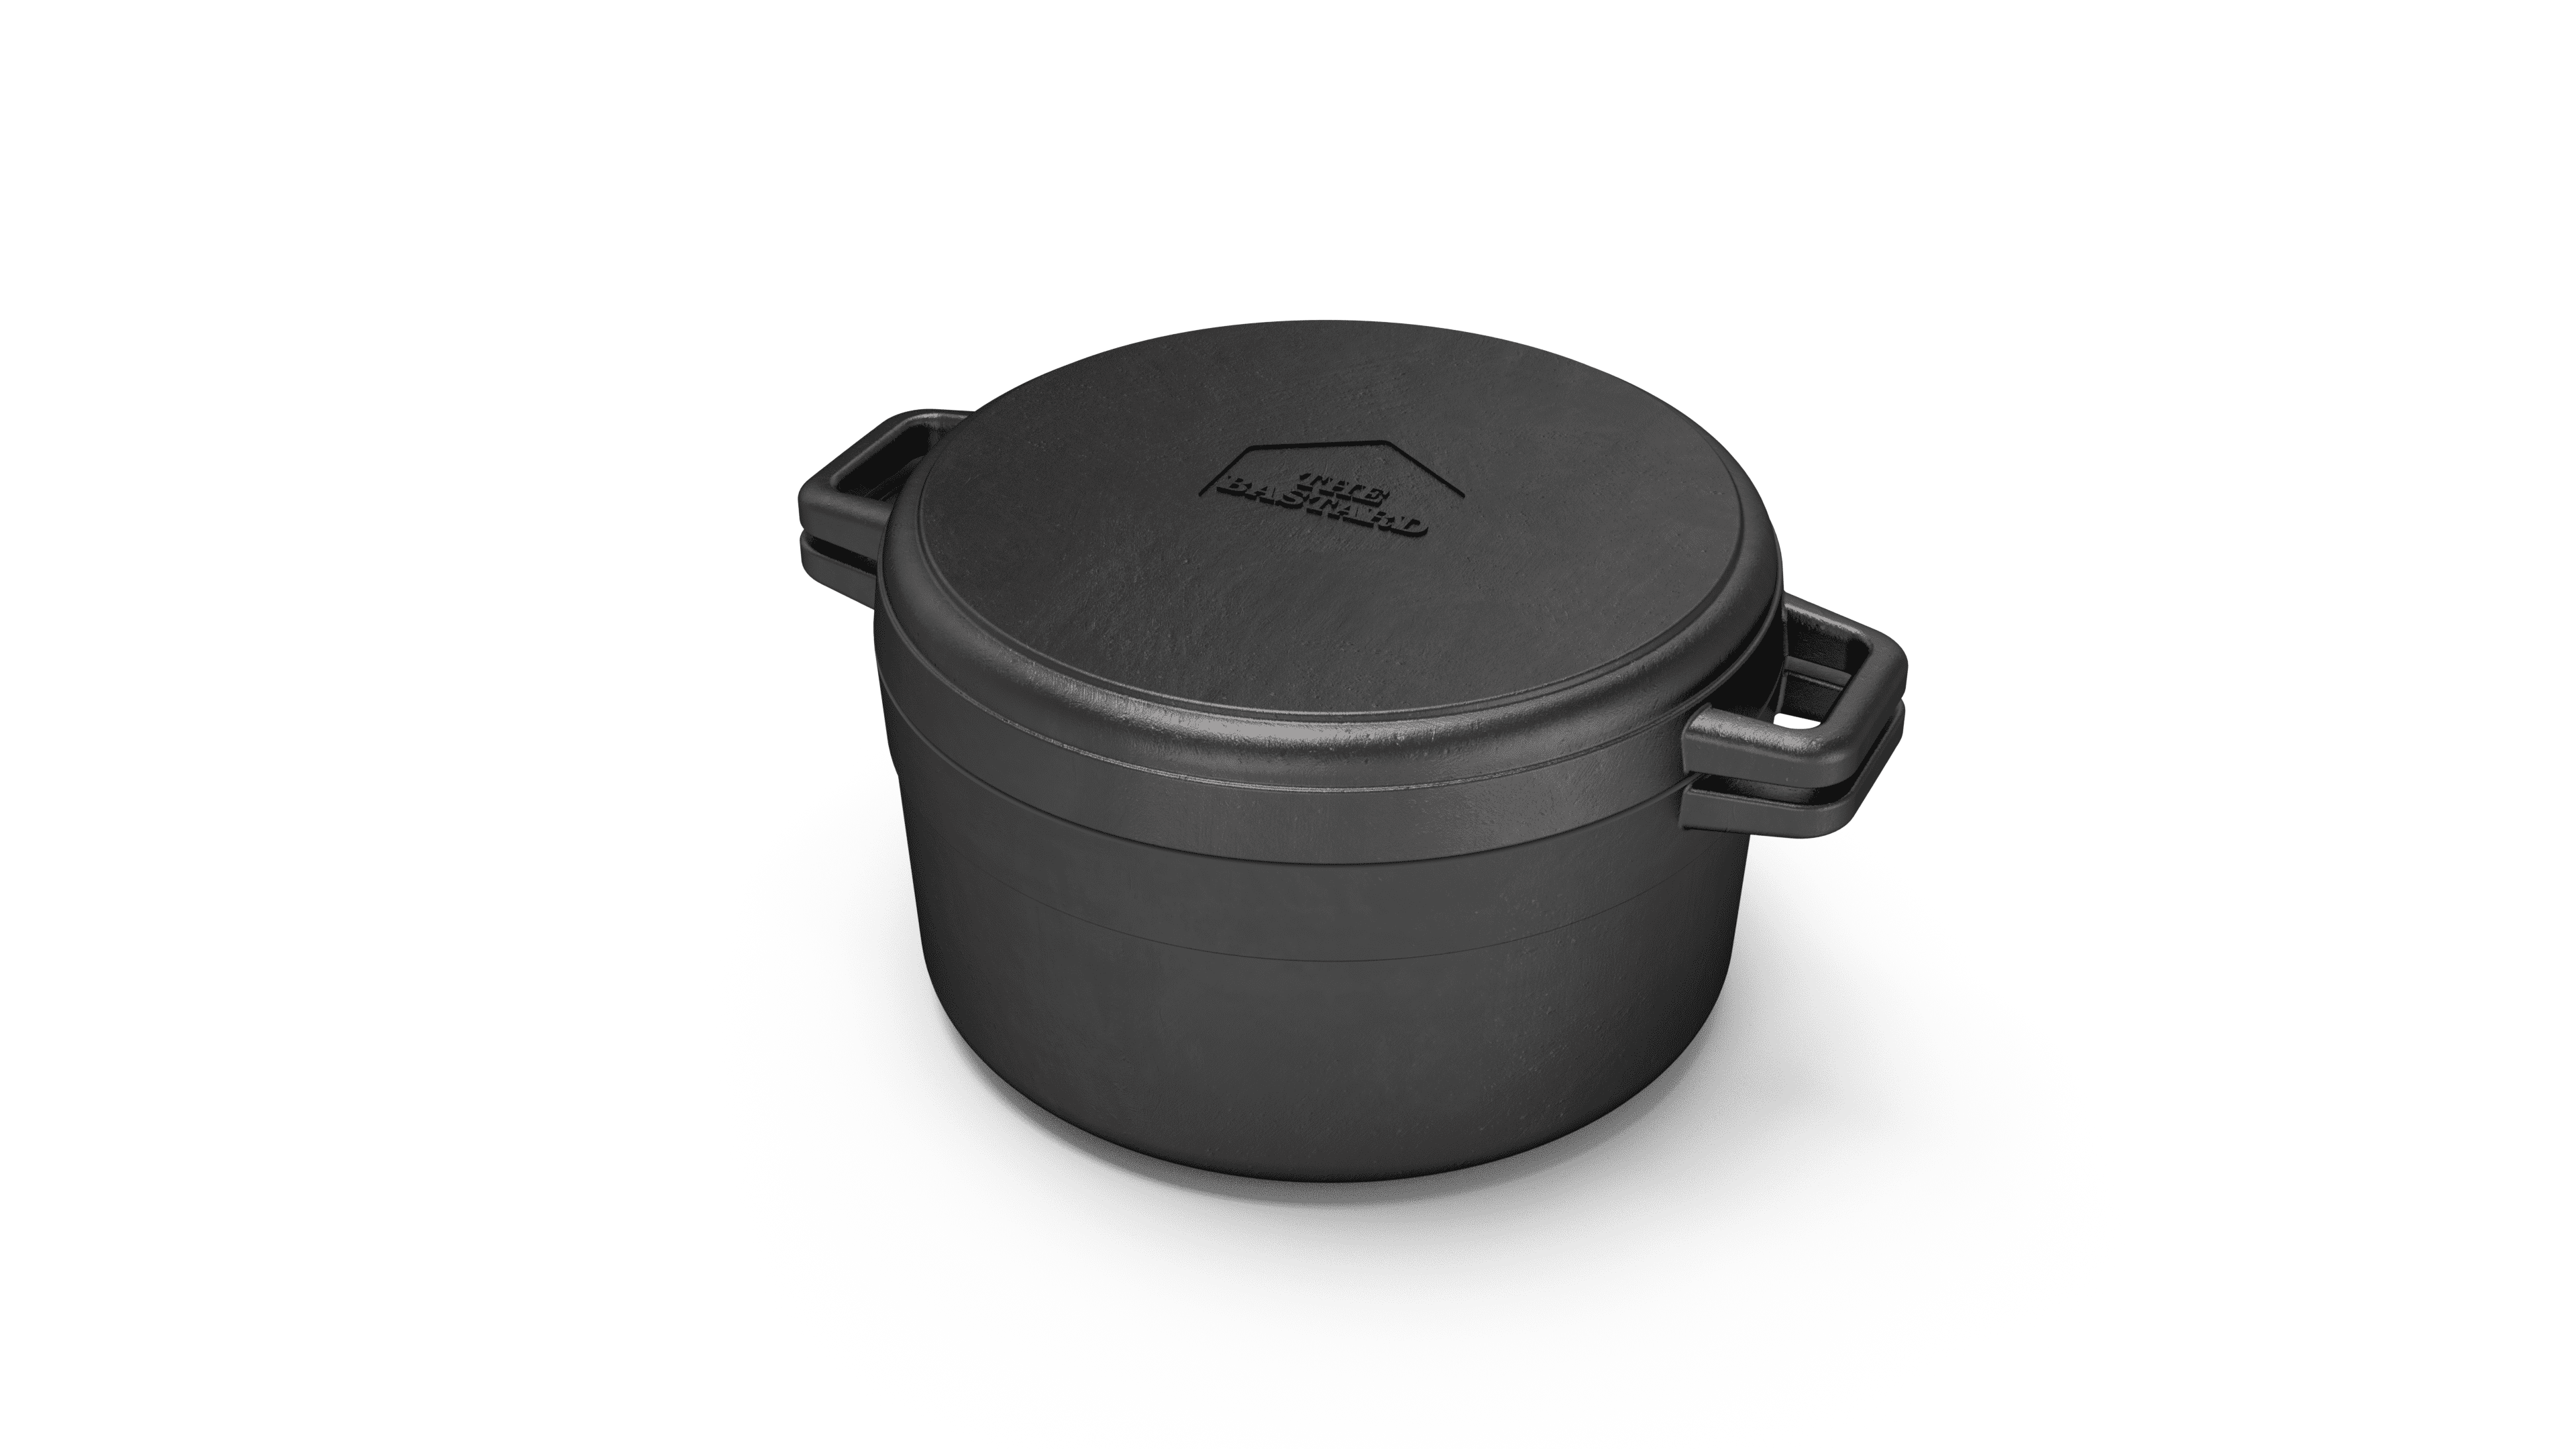 BBQ-Toro Ultimate Dutch Oven with PRO3+ Coating, 9.0 L (DO9U), Saucepan  with Legs, Pre-Cooked - Pre-Seasoned with PRO3+ Process, Cast Iron Pot